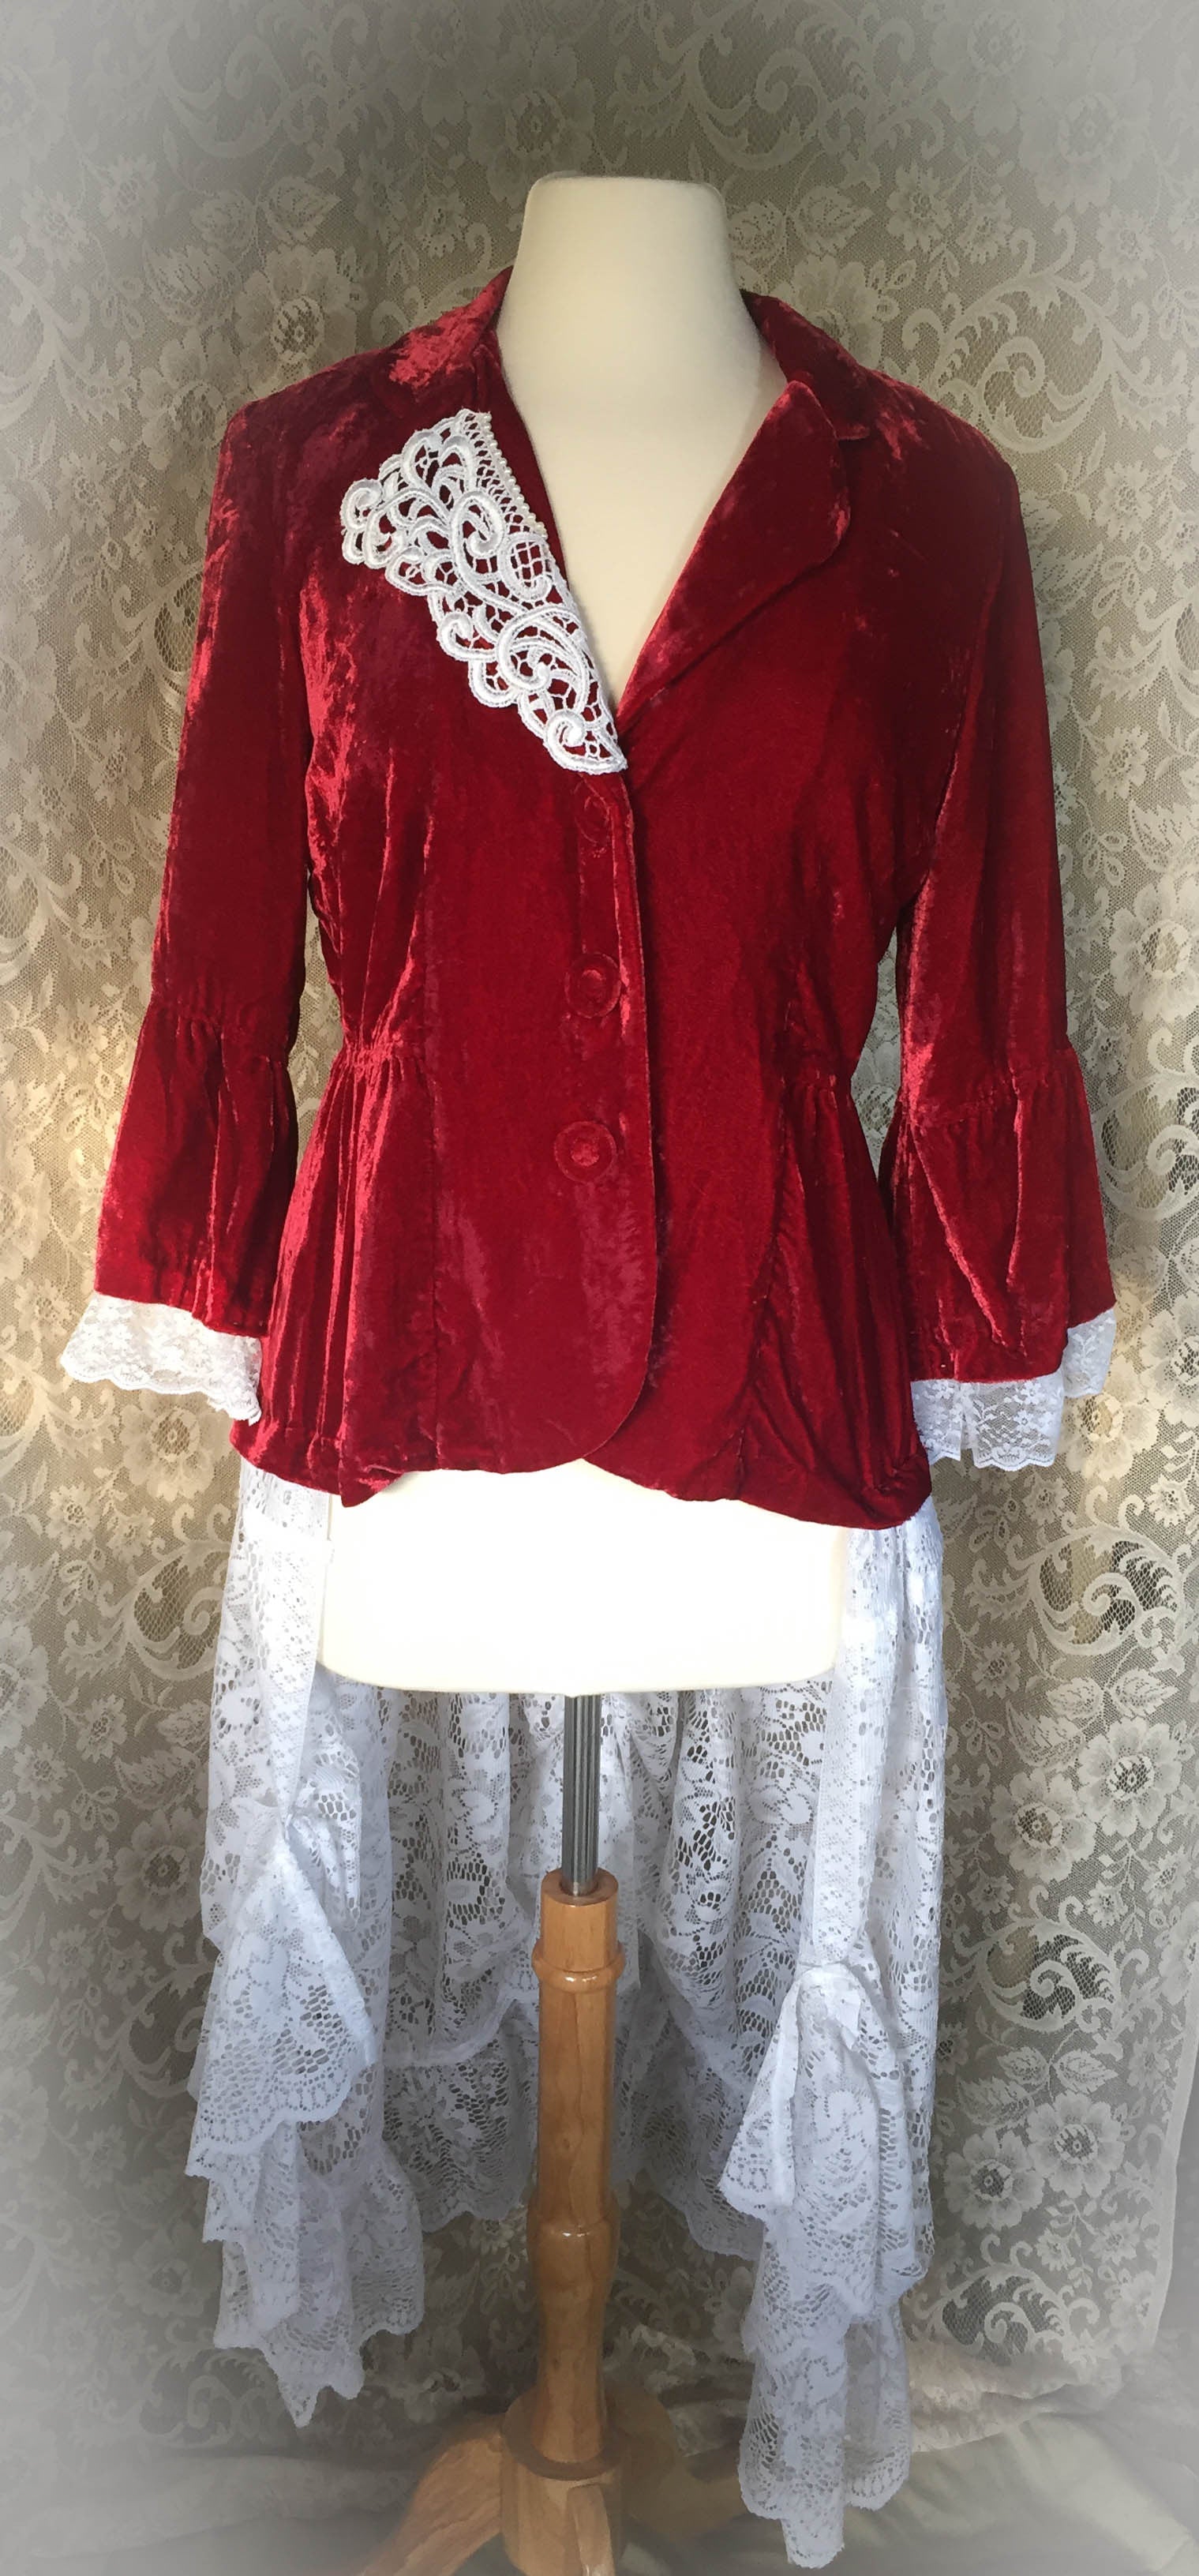 Red Crushed Velvet Recycled/Upcycled Victorian Jacket -SMALL